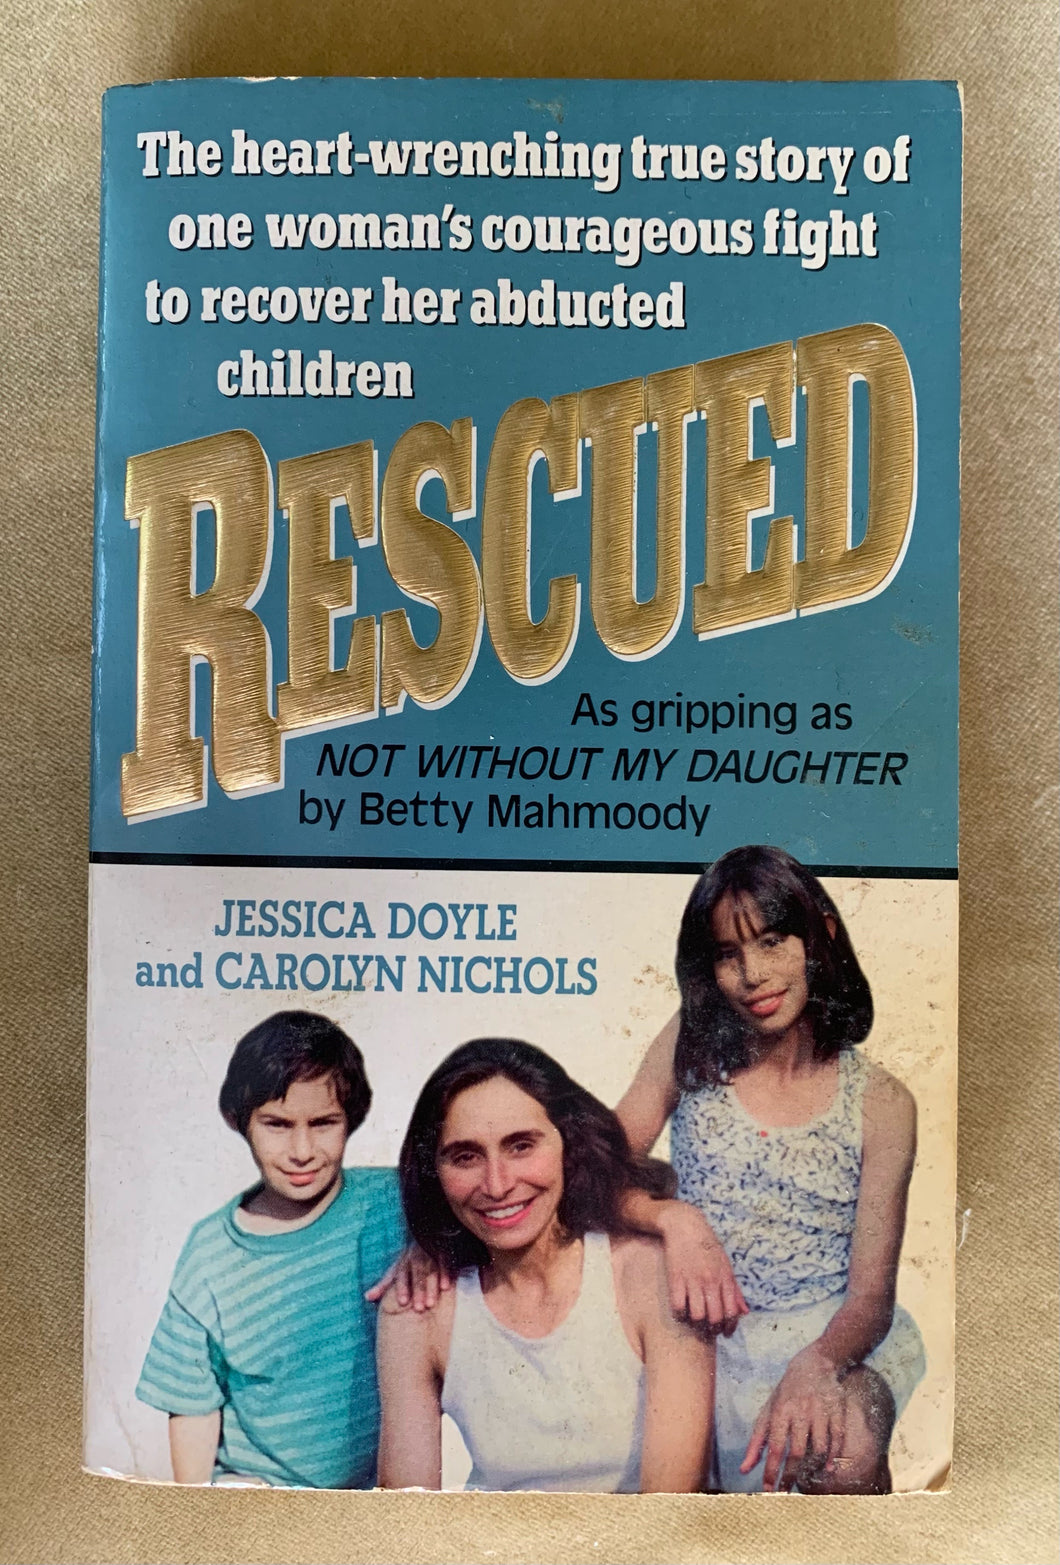 Rescued: The Heart-Wrenching True Story of One Woman's Courageous Fight to Recover Her Abducted Children